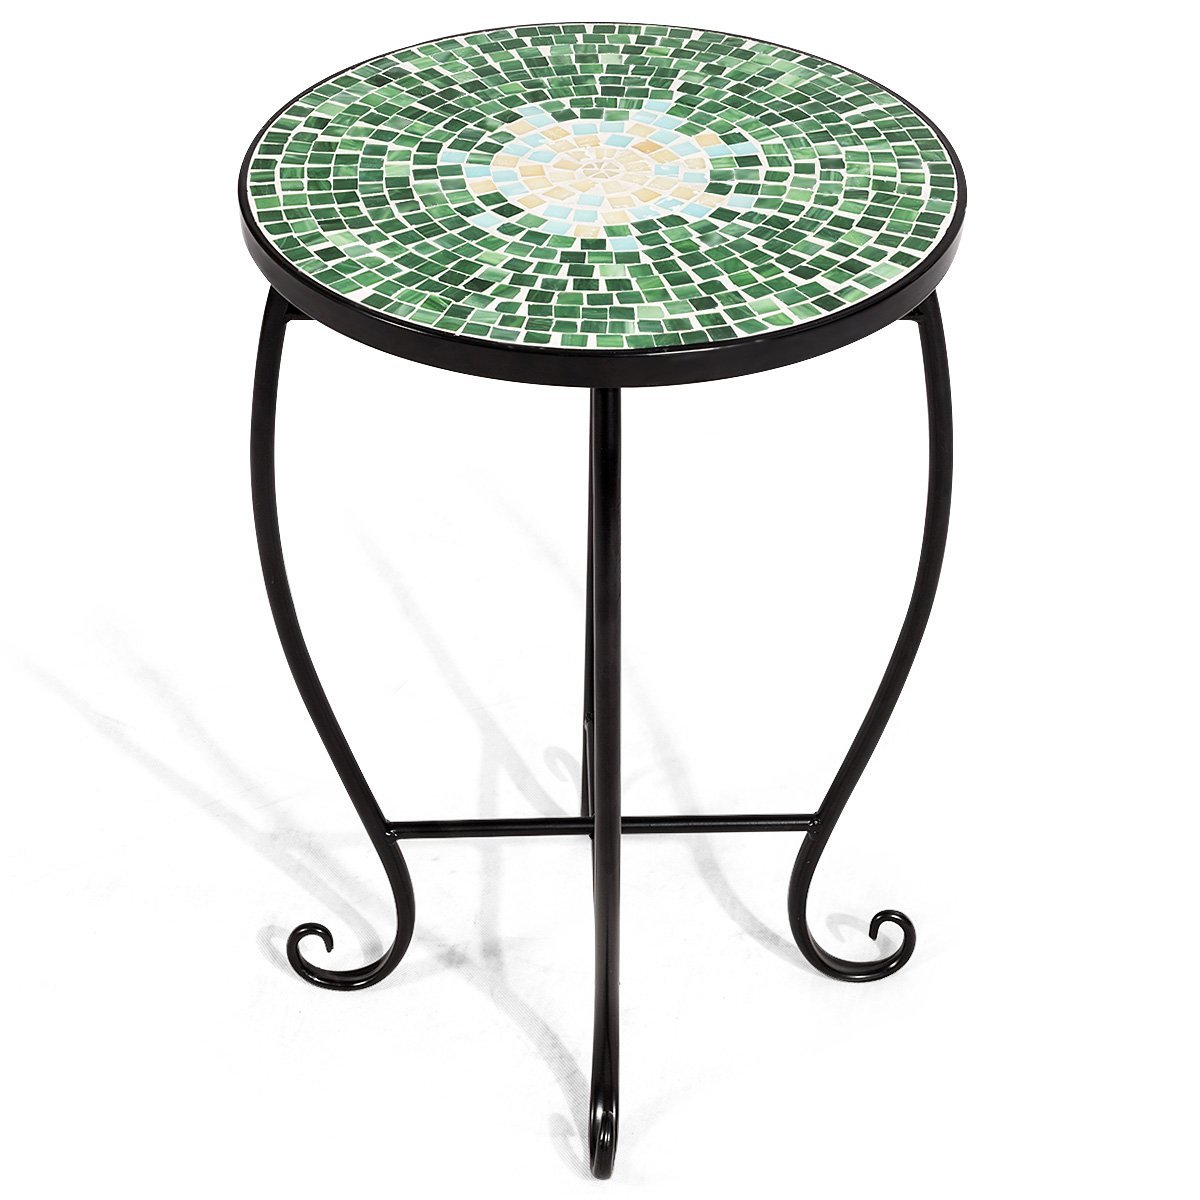 mosaic accent find line table outdoor get quotations giantex round side patio plant stand porch beach theme balcony back deck pool kitchen mats tall end ryobi nautical themed